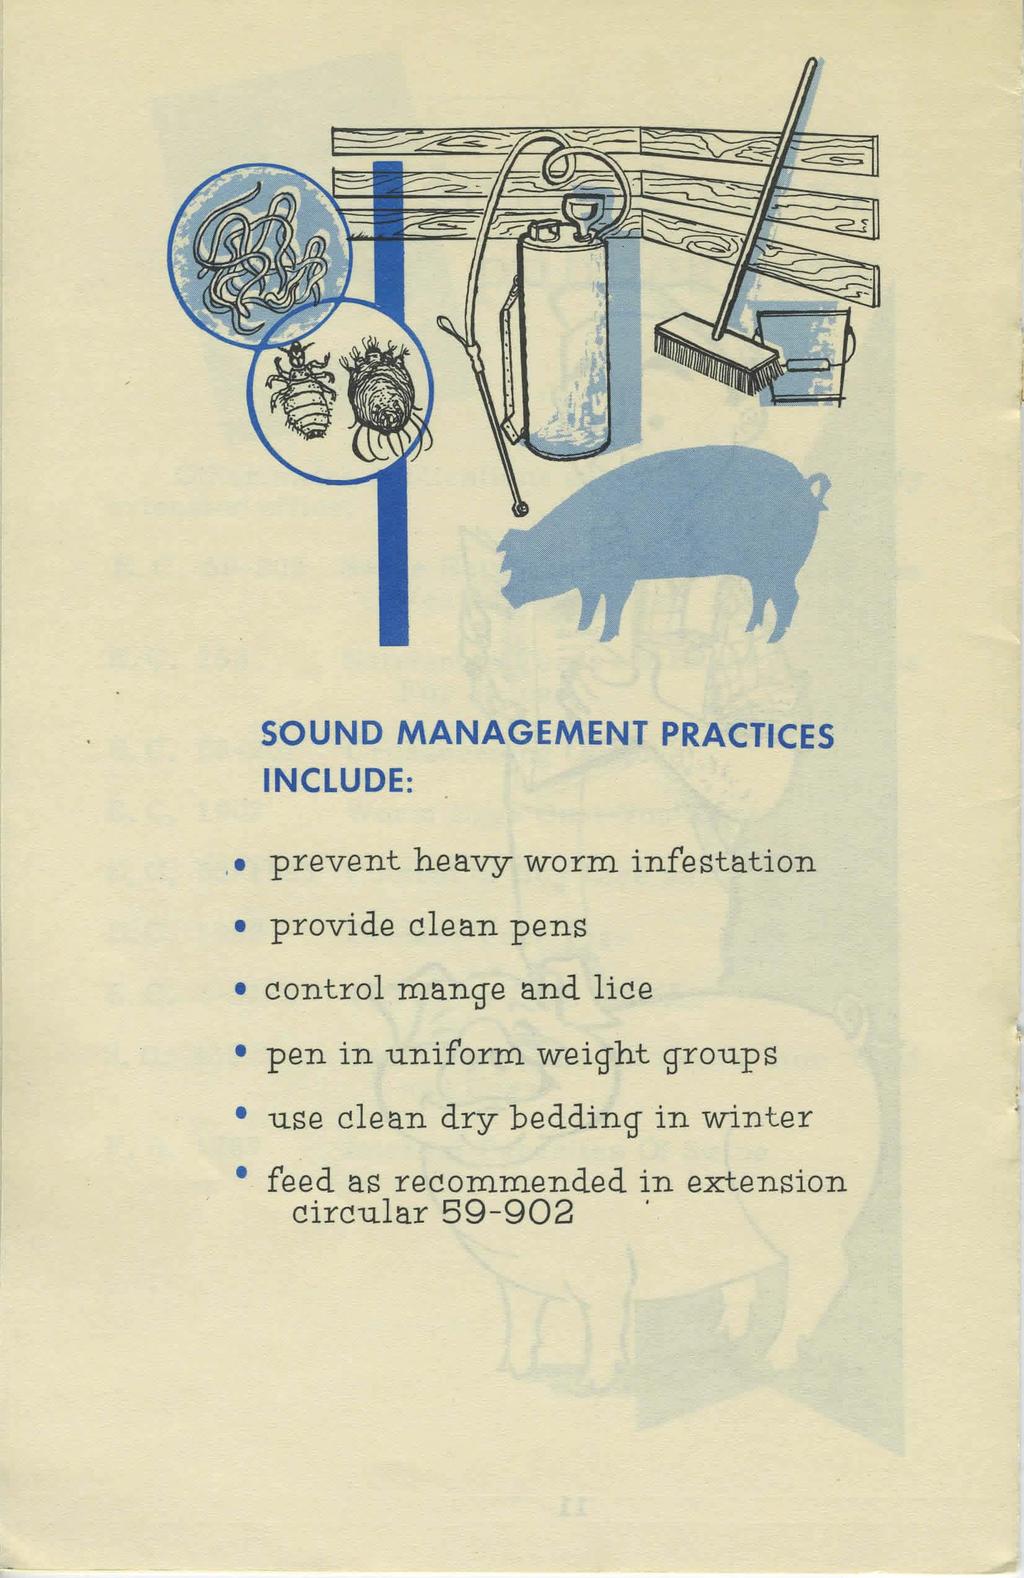 SOUND MANAGEMENT PRACTICES INCLUDE: prevent heavy worm infestation provide clean pens control mange and lice